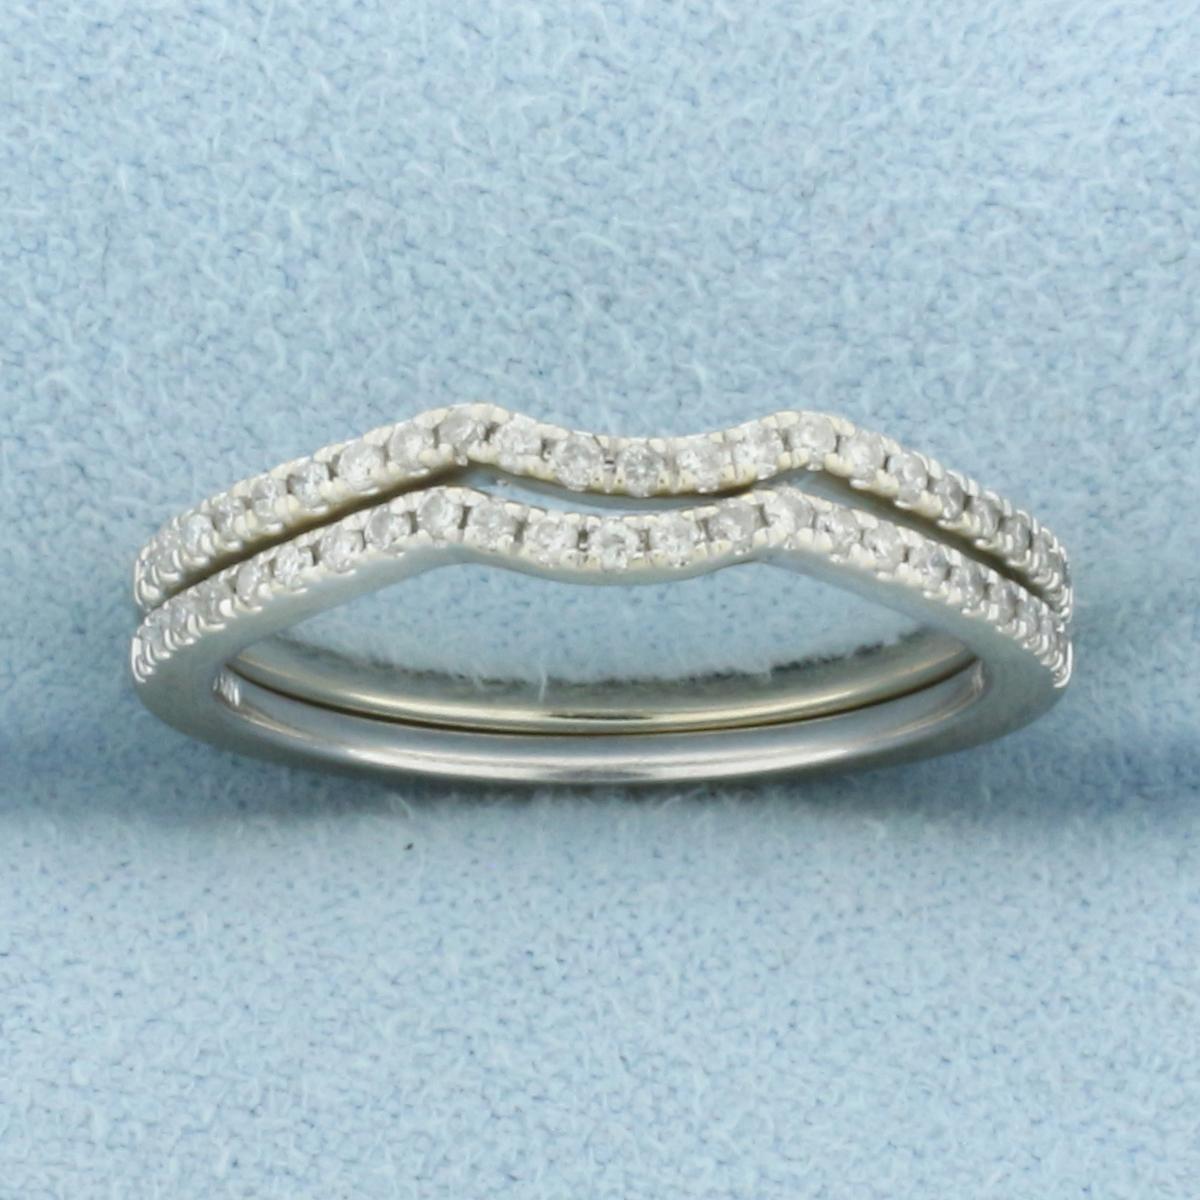 Curved Diamond Wedding Band Rings Set Of 2 In 14k White Gold